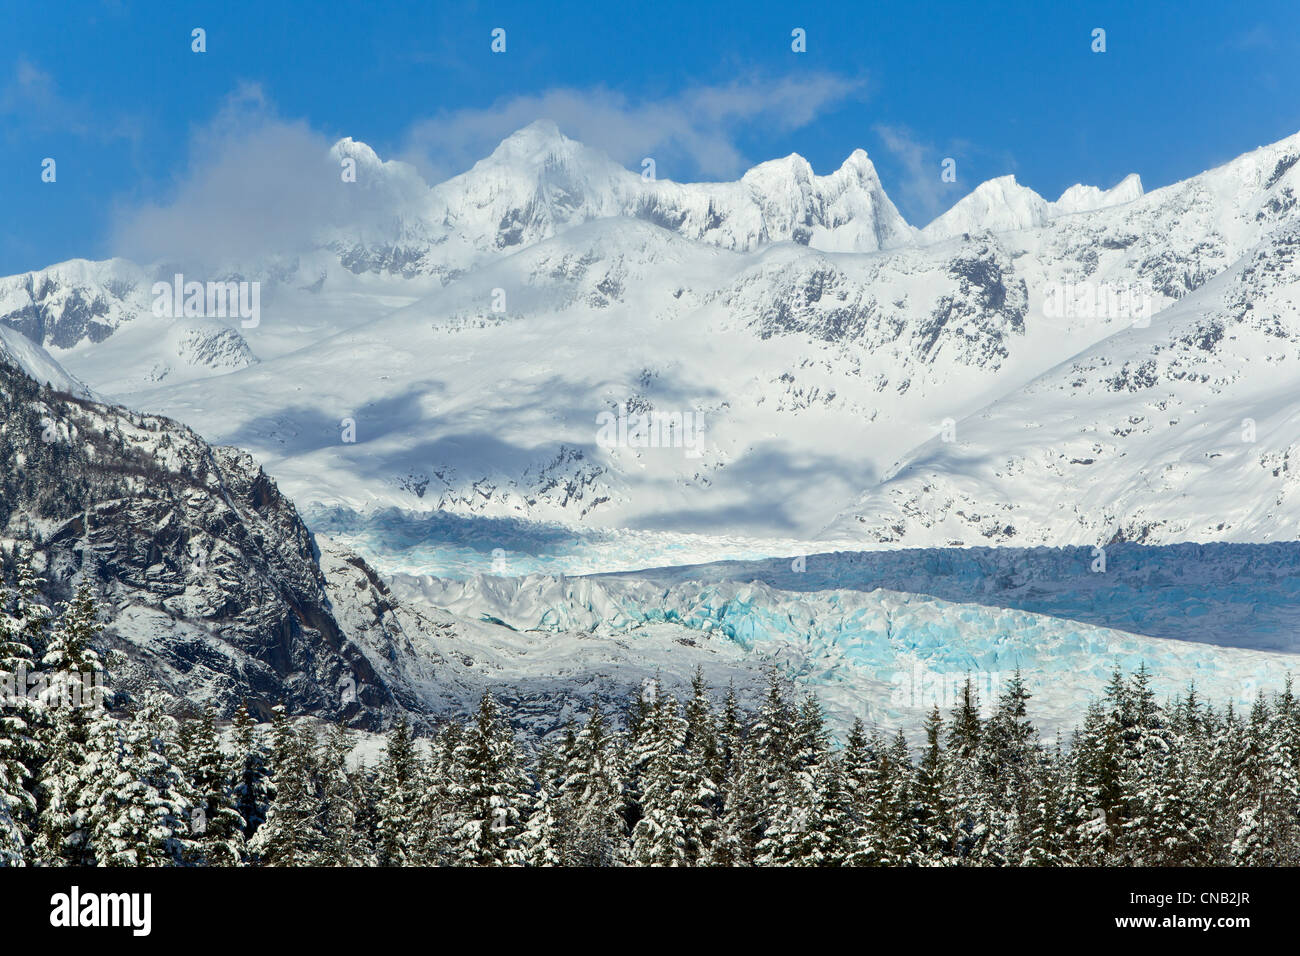 Scenic winter landscape of Mendenhall River, Mendenhall Glacier and Towers, Tongass National Forest, Southeast Alaska Stock Photo